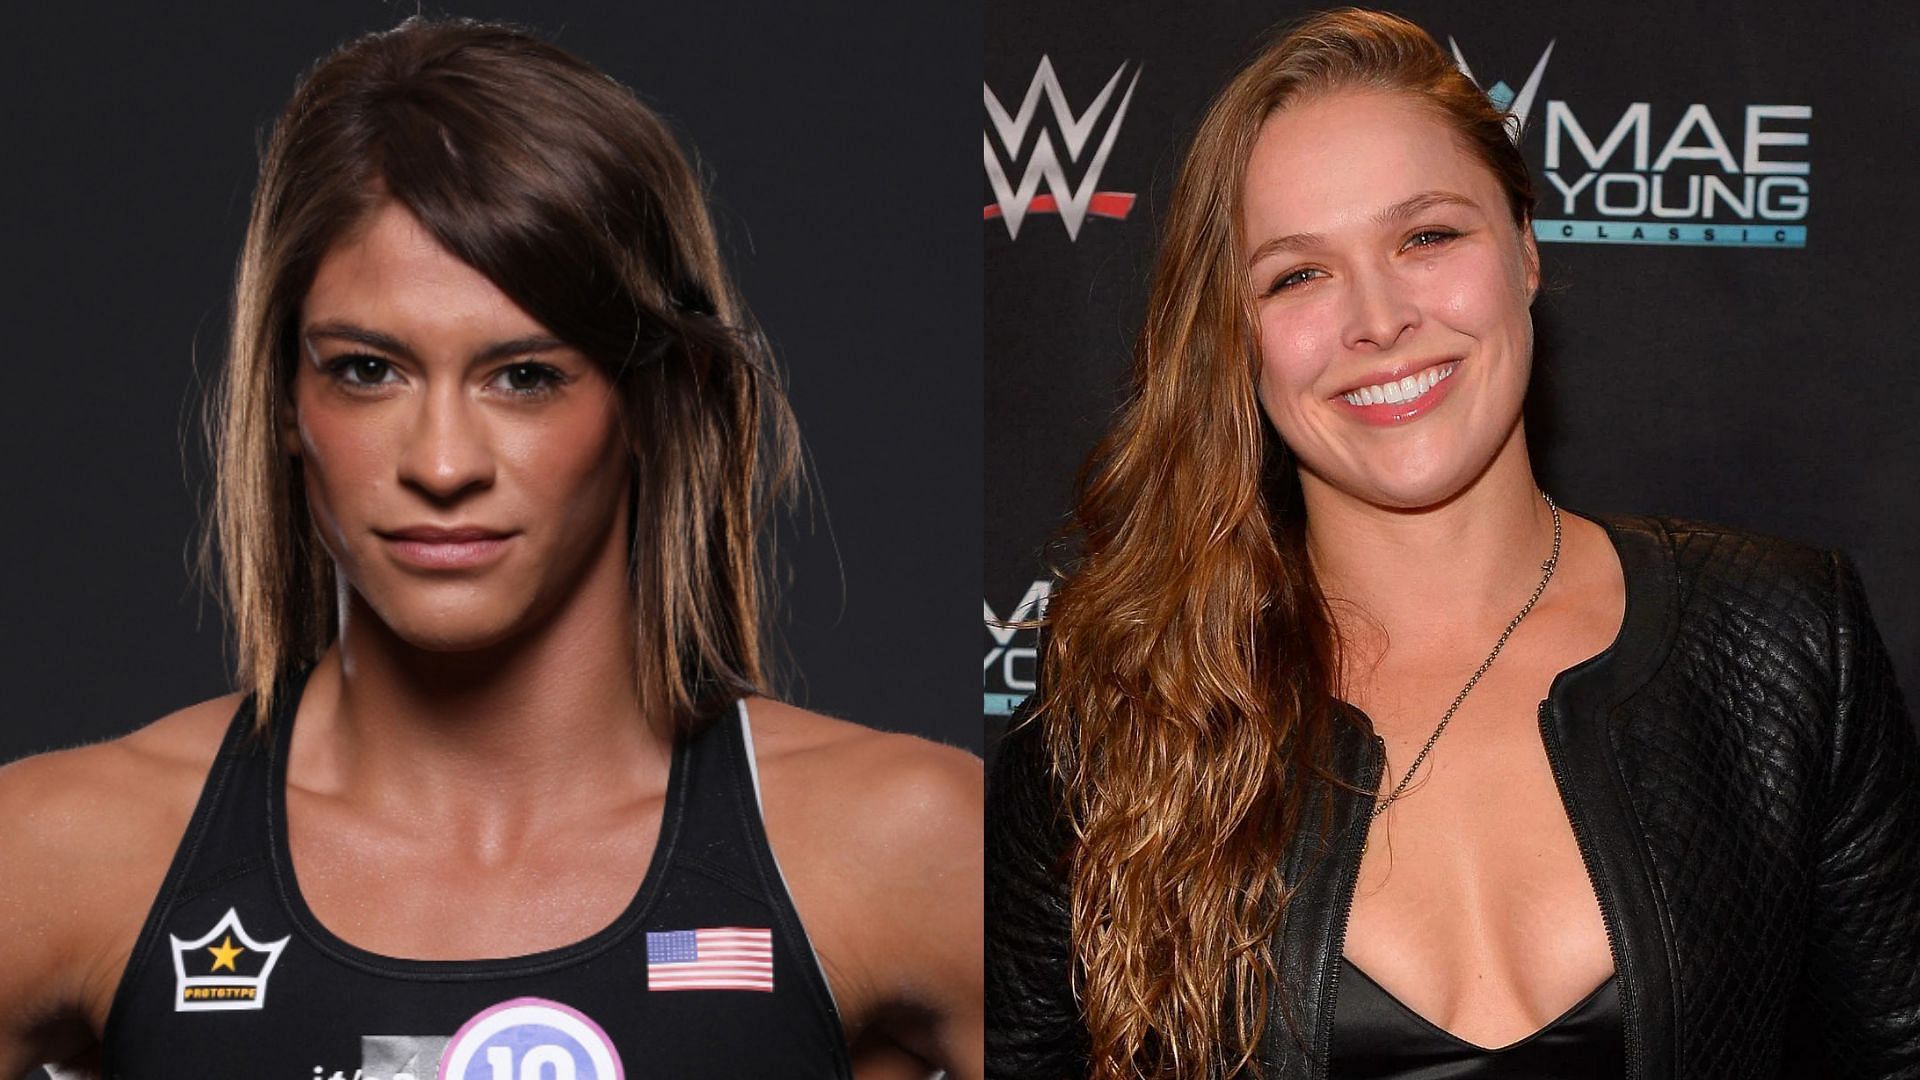 [Photo Credit: ONE Championship &amp; Getty] Alyse Anderson &amp; Ronda Rousey